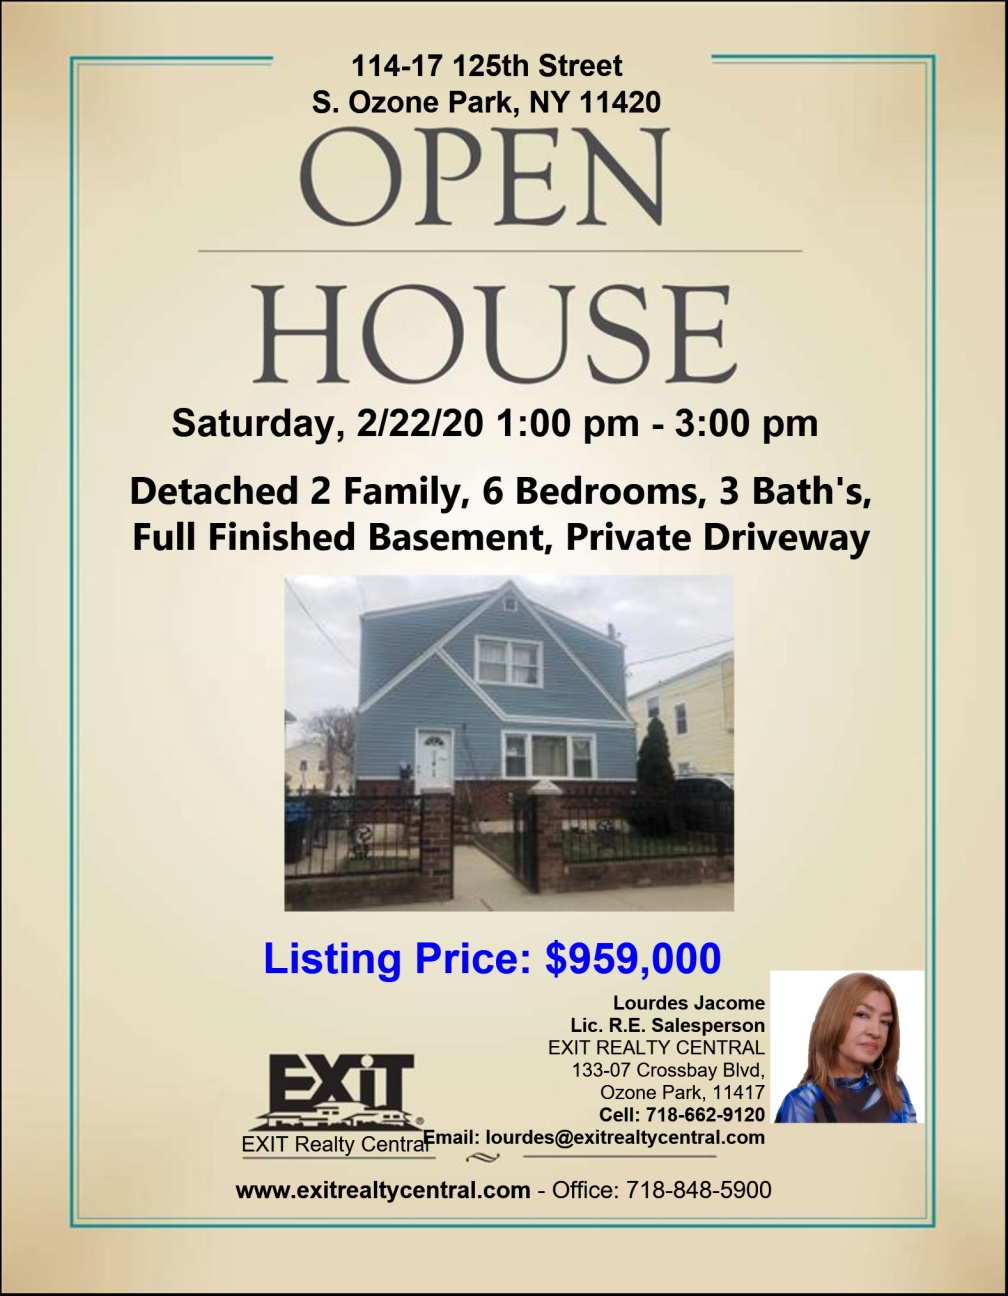 Open House in S. Ozone Park